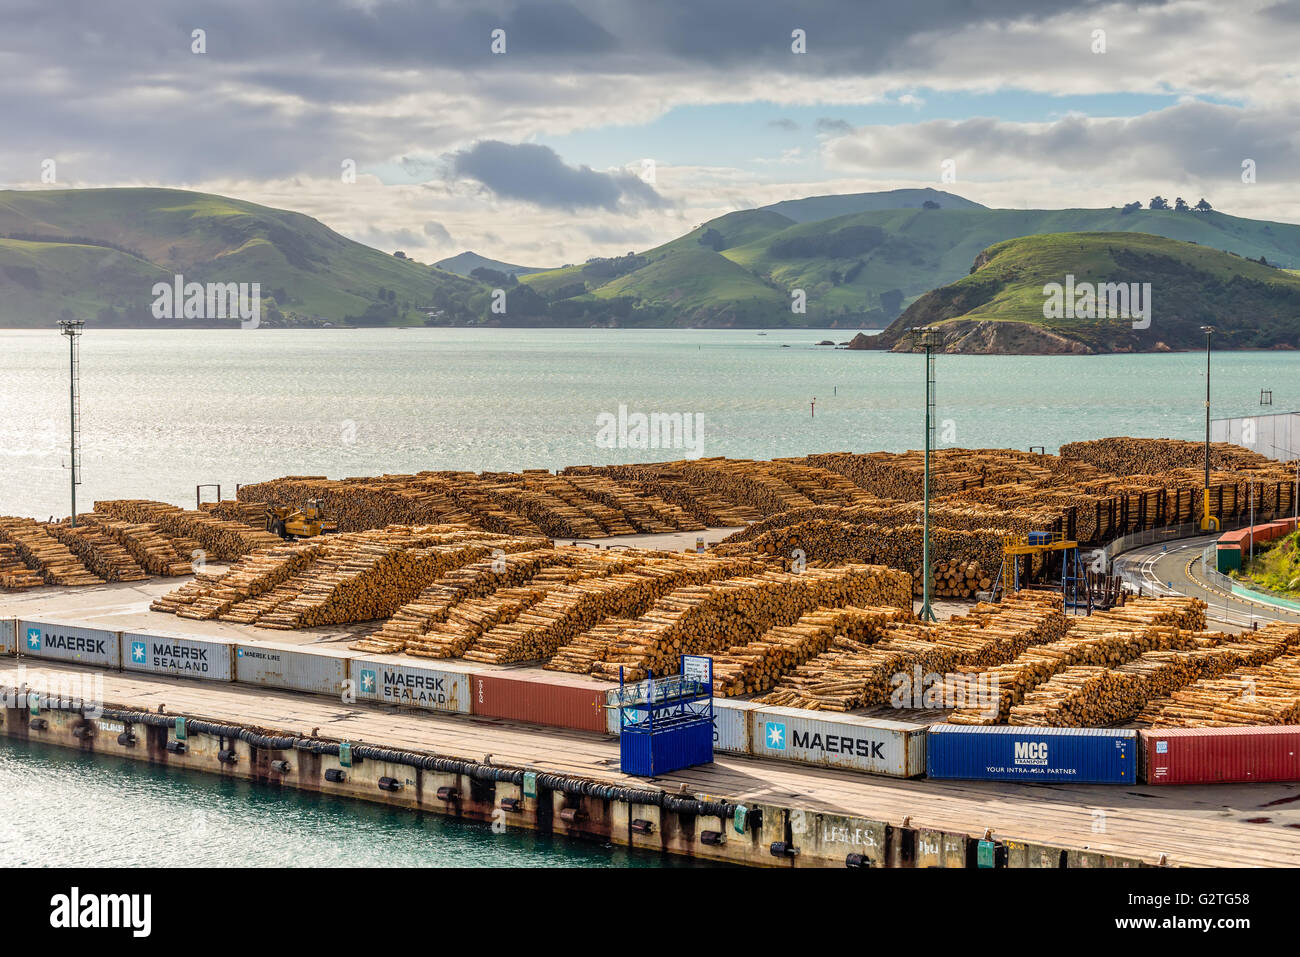 Timber is ready for shipping at a dock, Port Chalmers, Dunedin, Otago region, South Island, New Zealand Stock Photo